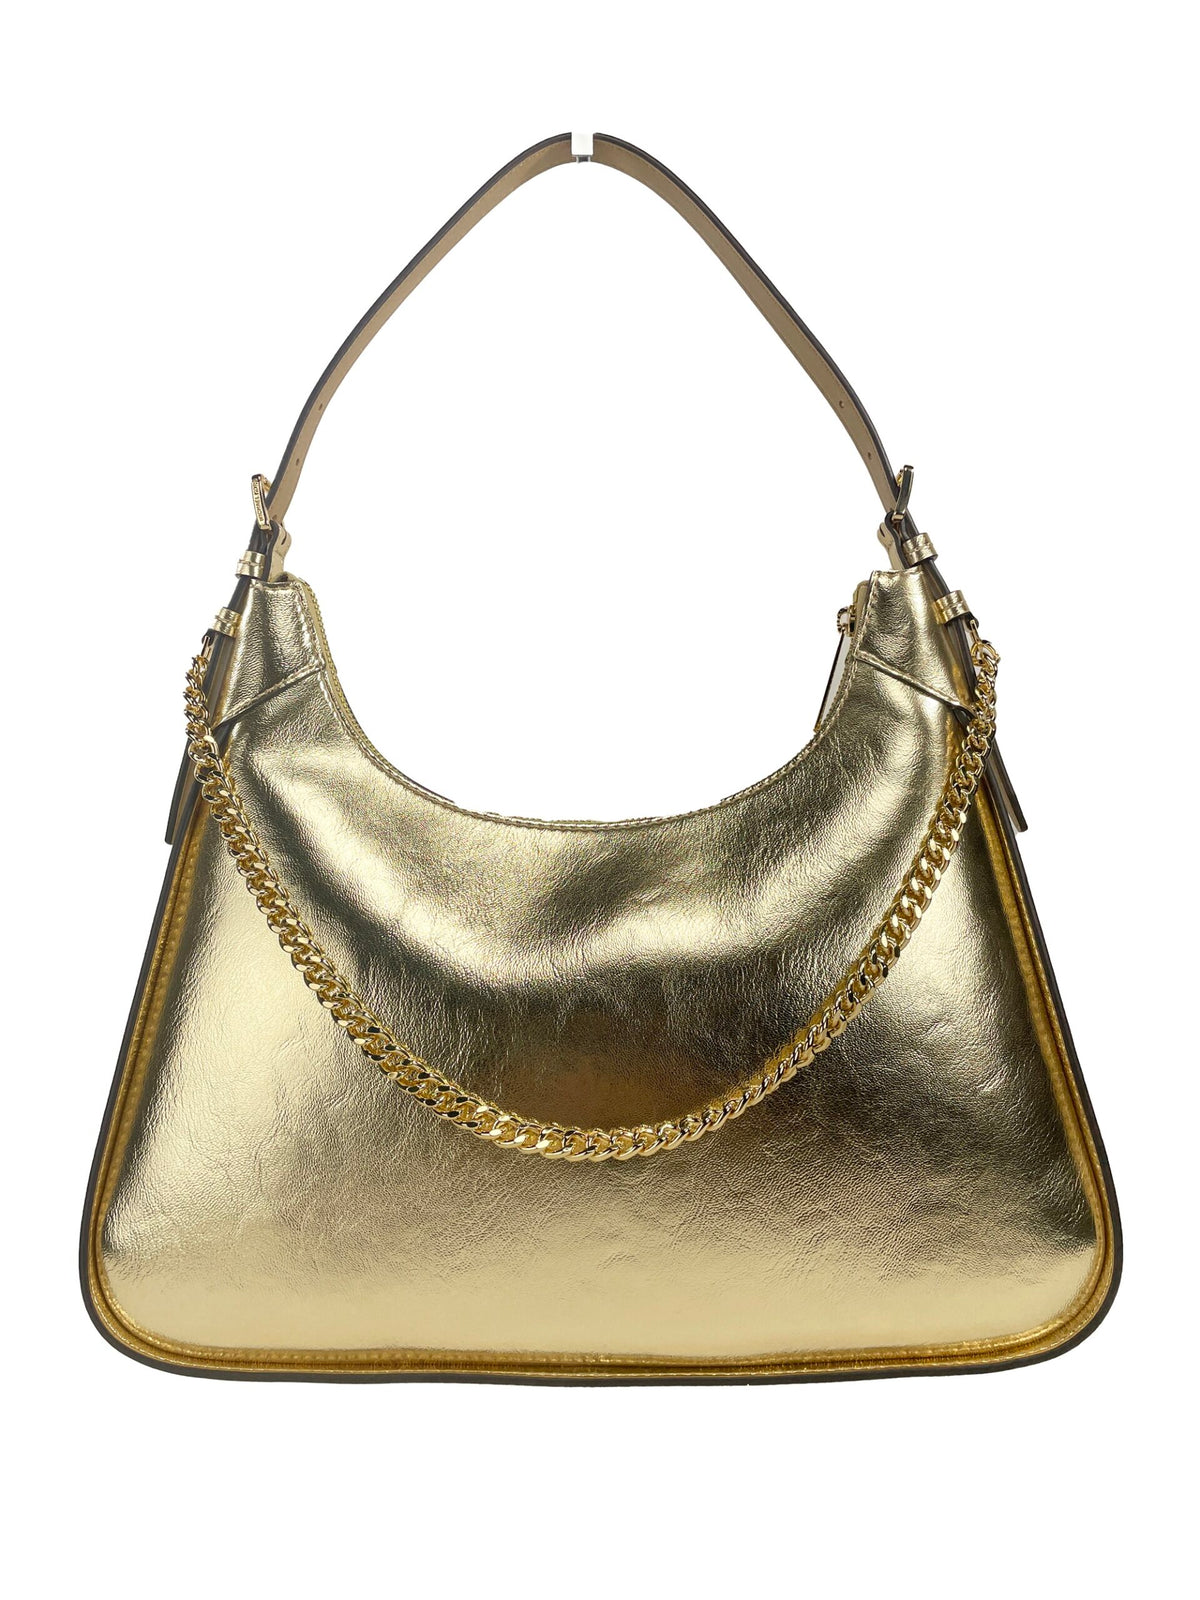 Michael Kors Wilma Large Smooth Leather Chain Shoulder Bag Purse Gold